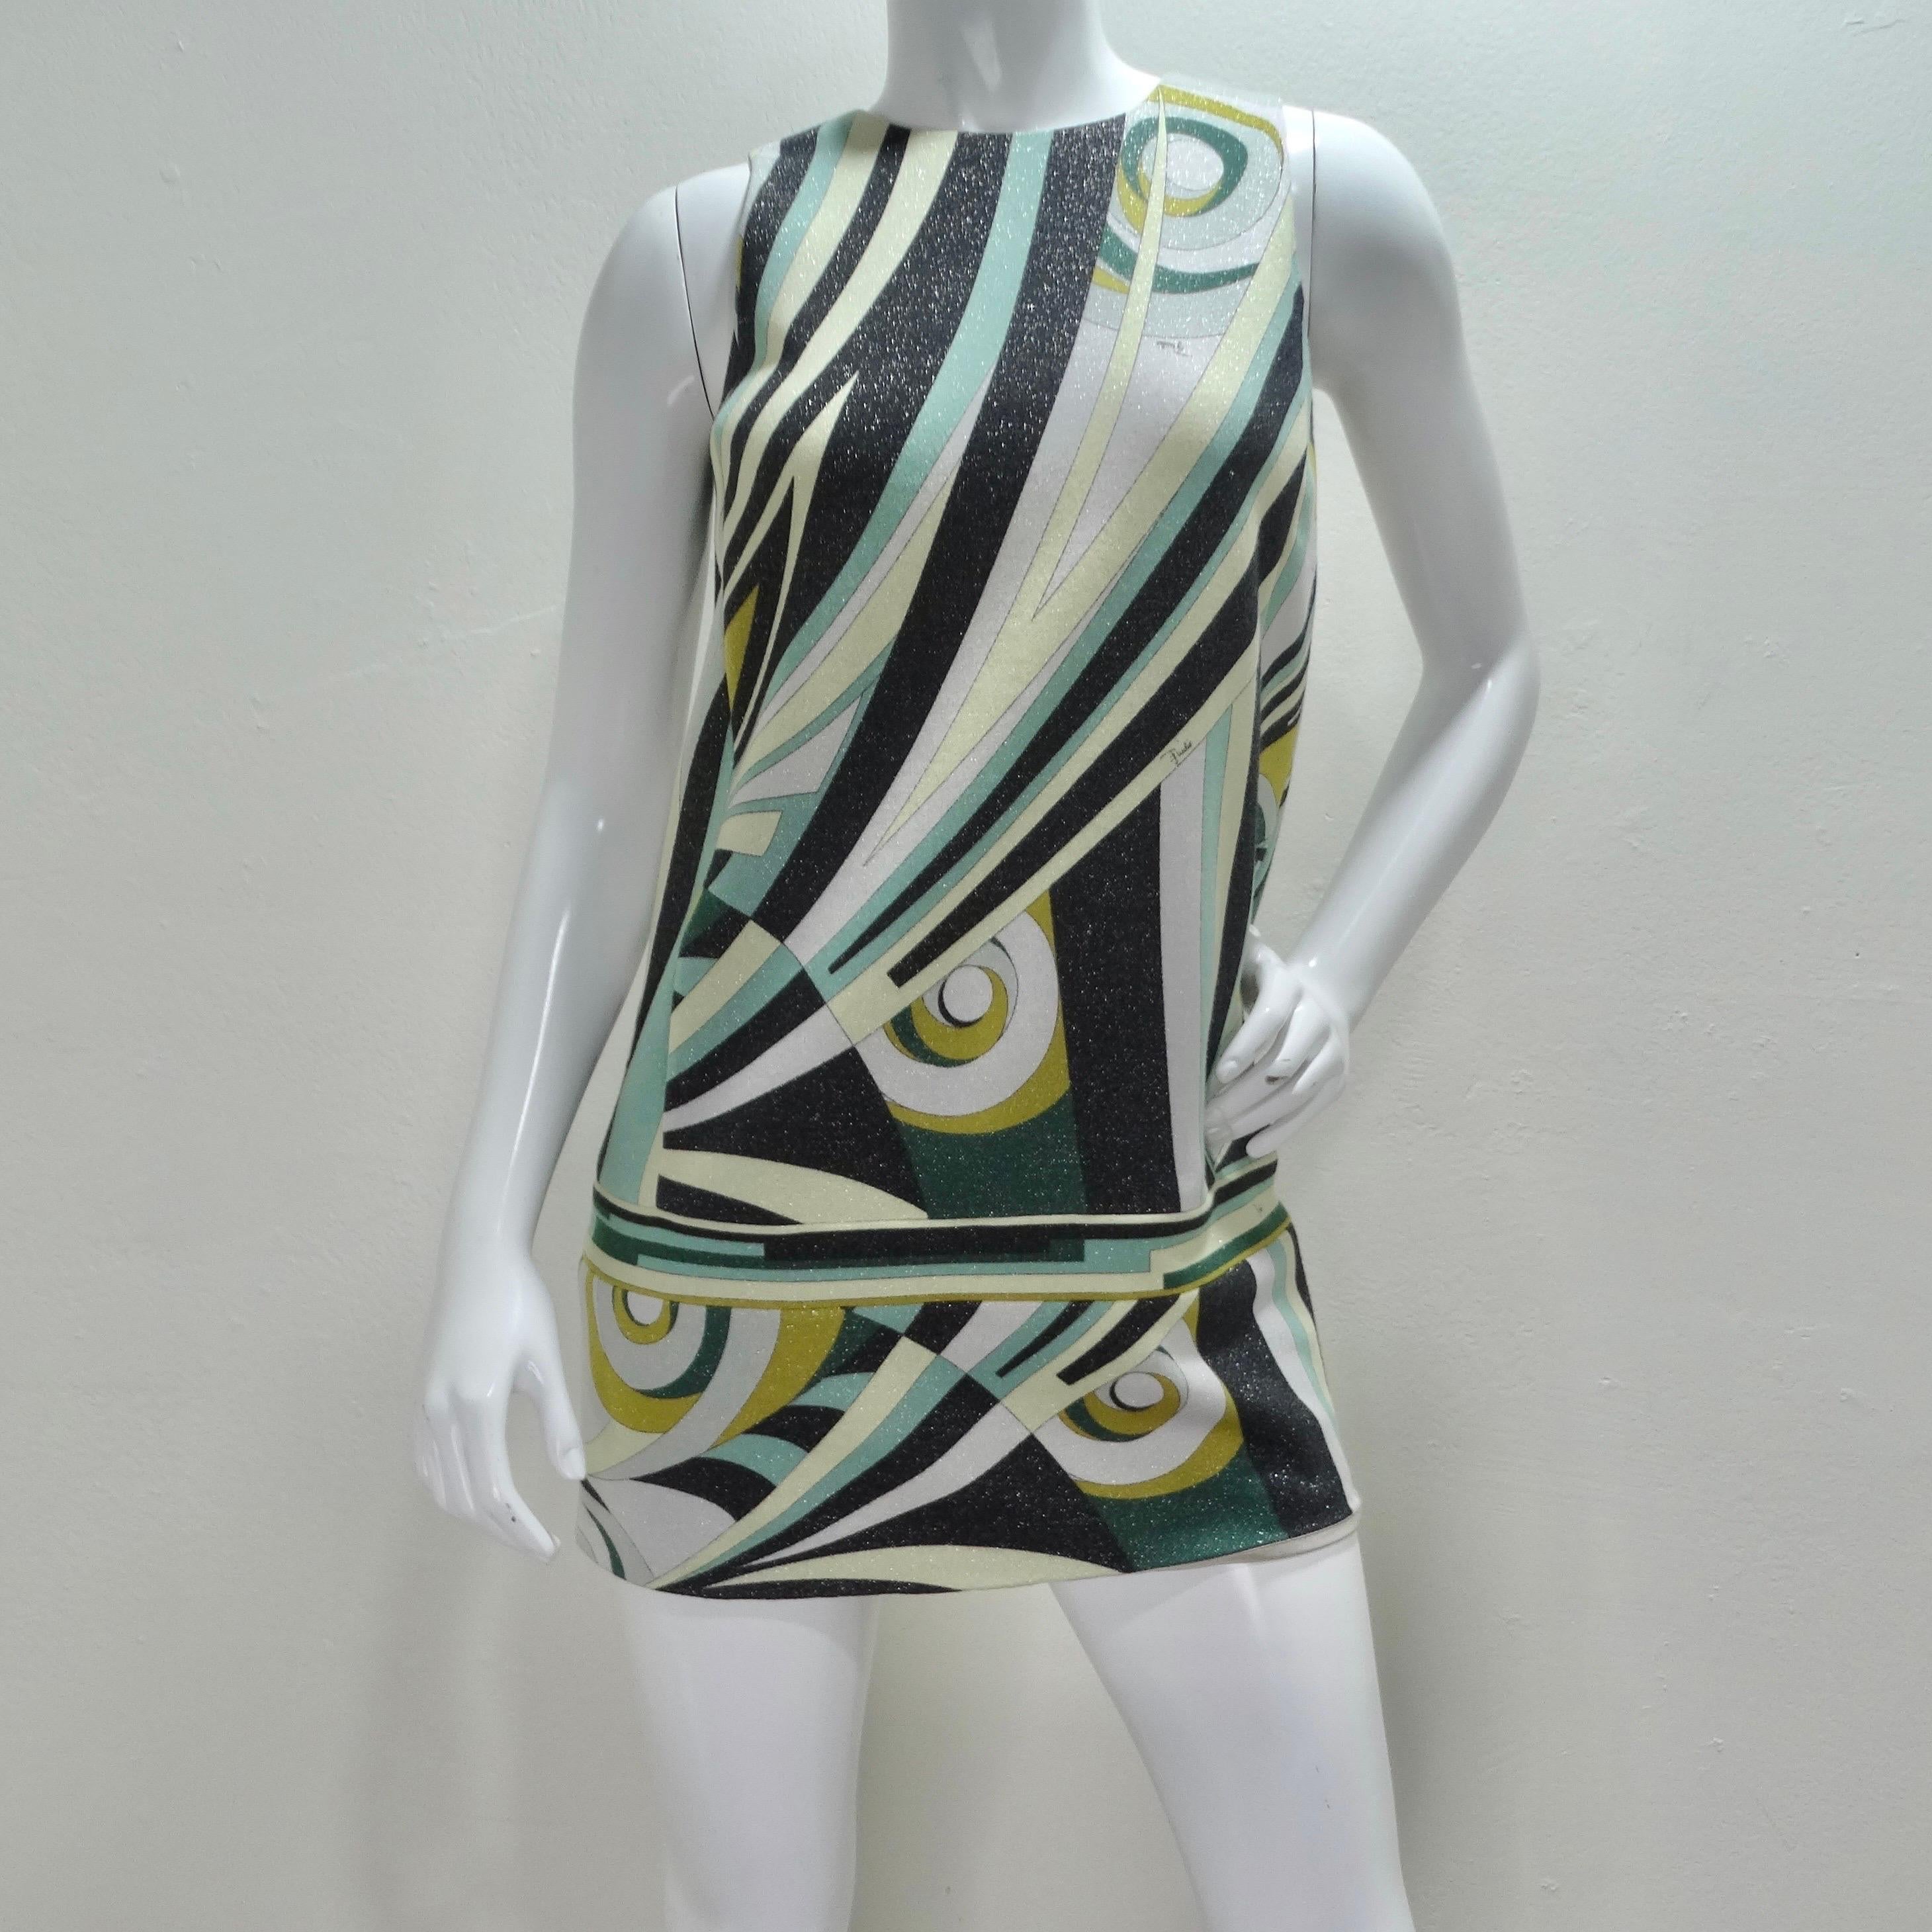 This 1980s Emilio Pucci mini dress is sooo mod! The perfect mini dress for any occasion, get a look at this incredible straight cut dress in a signature Pucci whimsical print with hidden pockets at the center! The pockets are the finishing touch and